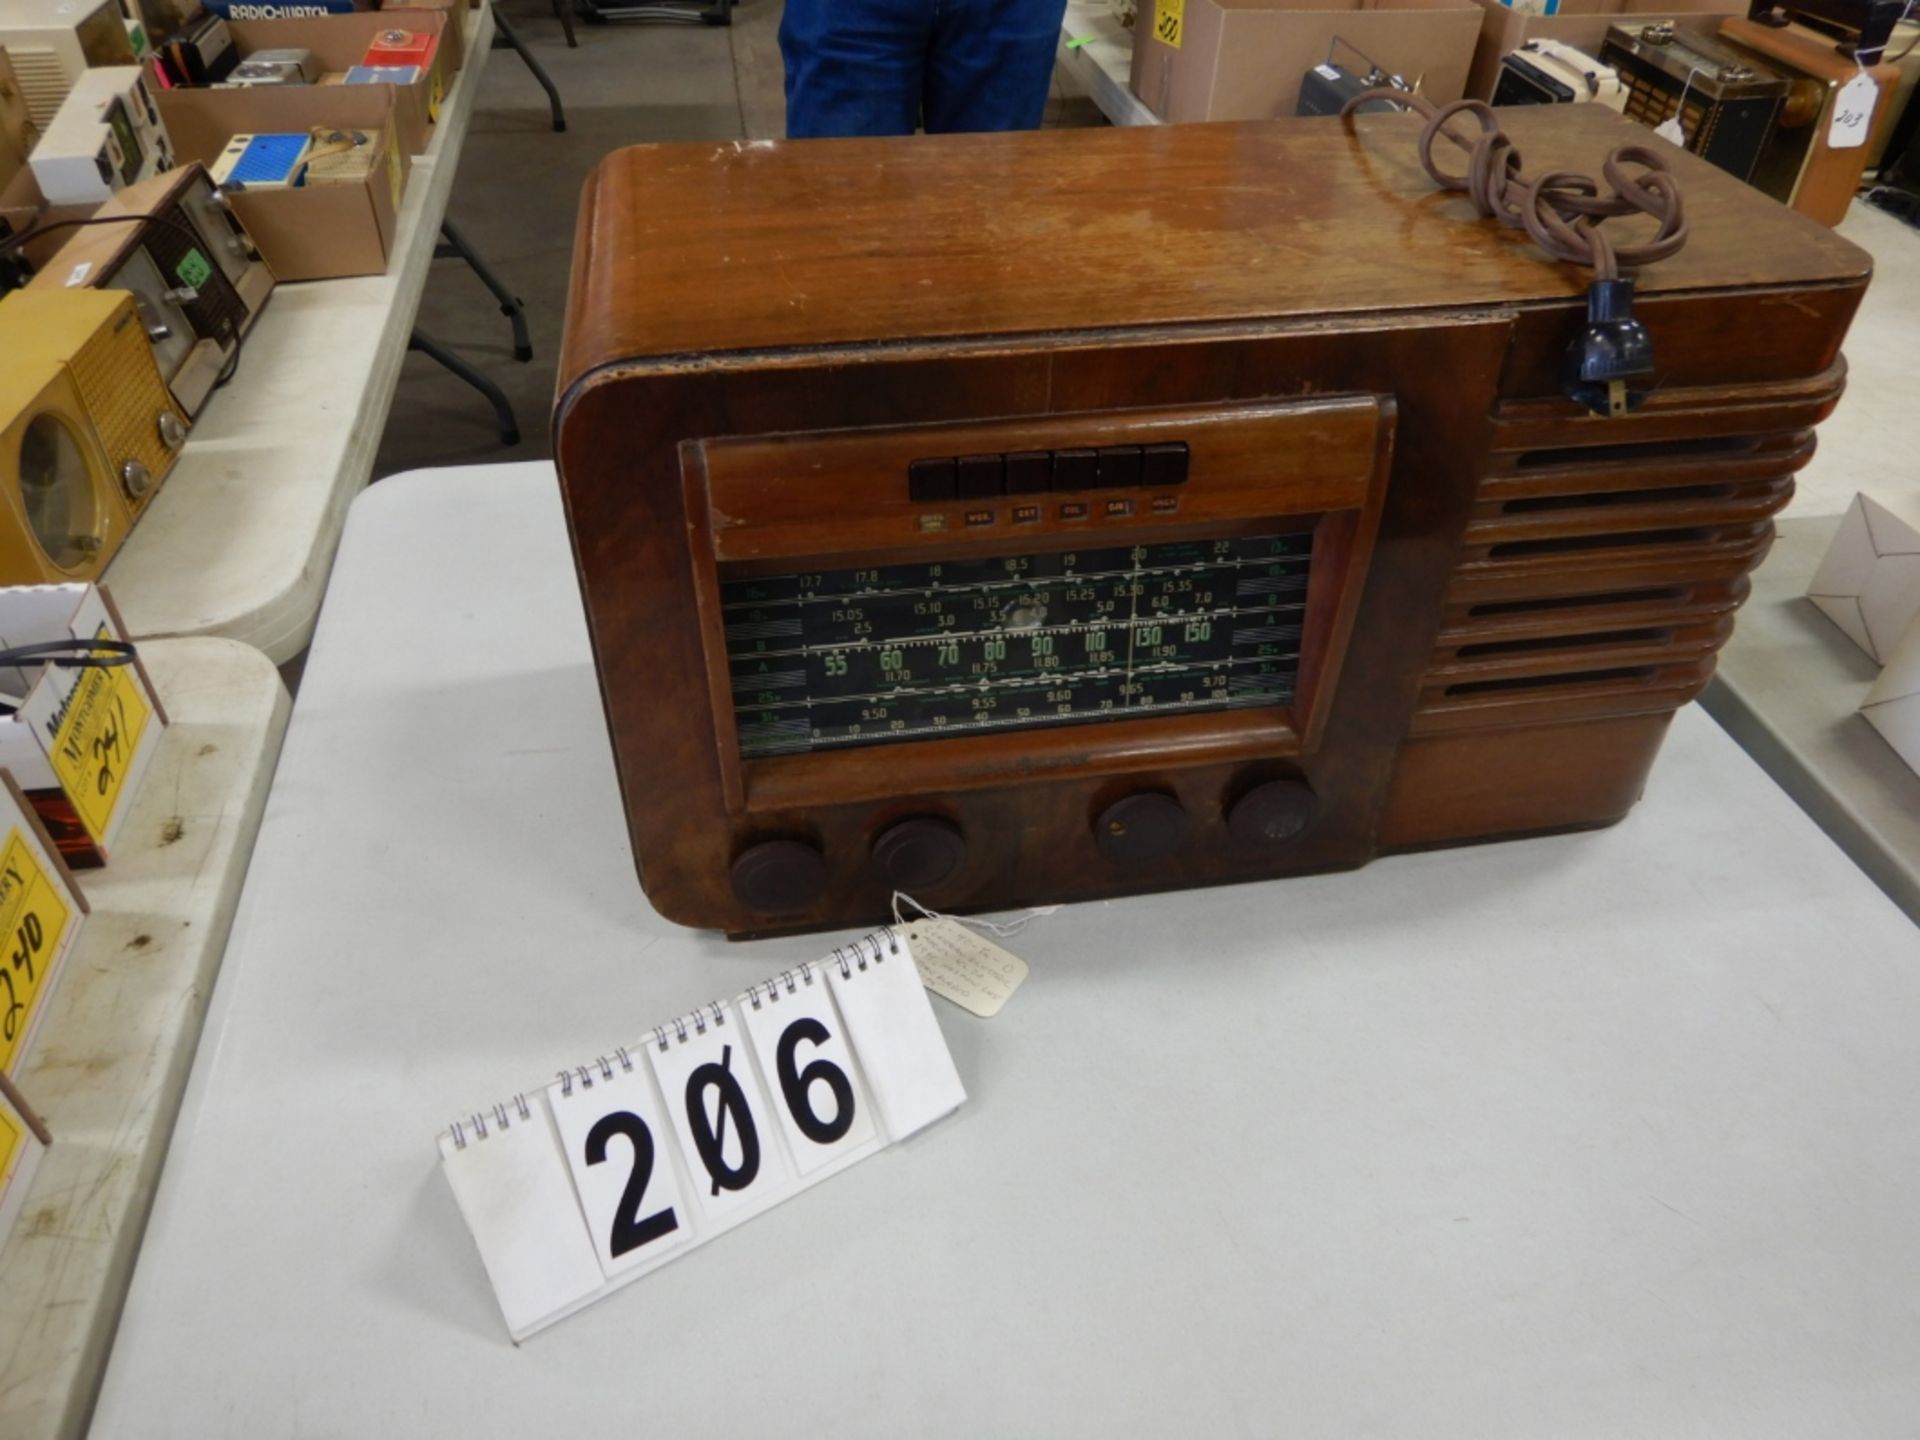 VINTAGE GE 1940'S BEAM-A-SCOPE RADIO NO AIREAL NO GROUND REQUIREDMODEL KL70; SERIAL # 346 WOOD CASE